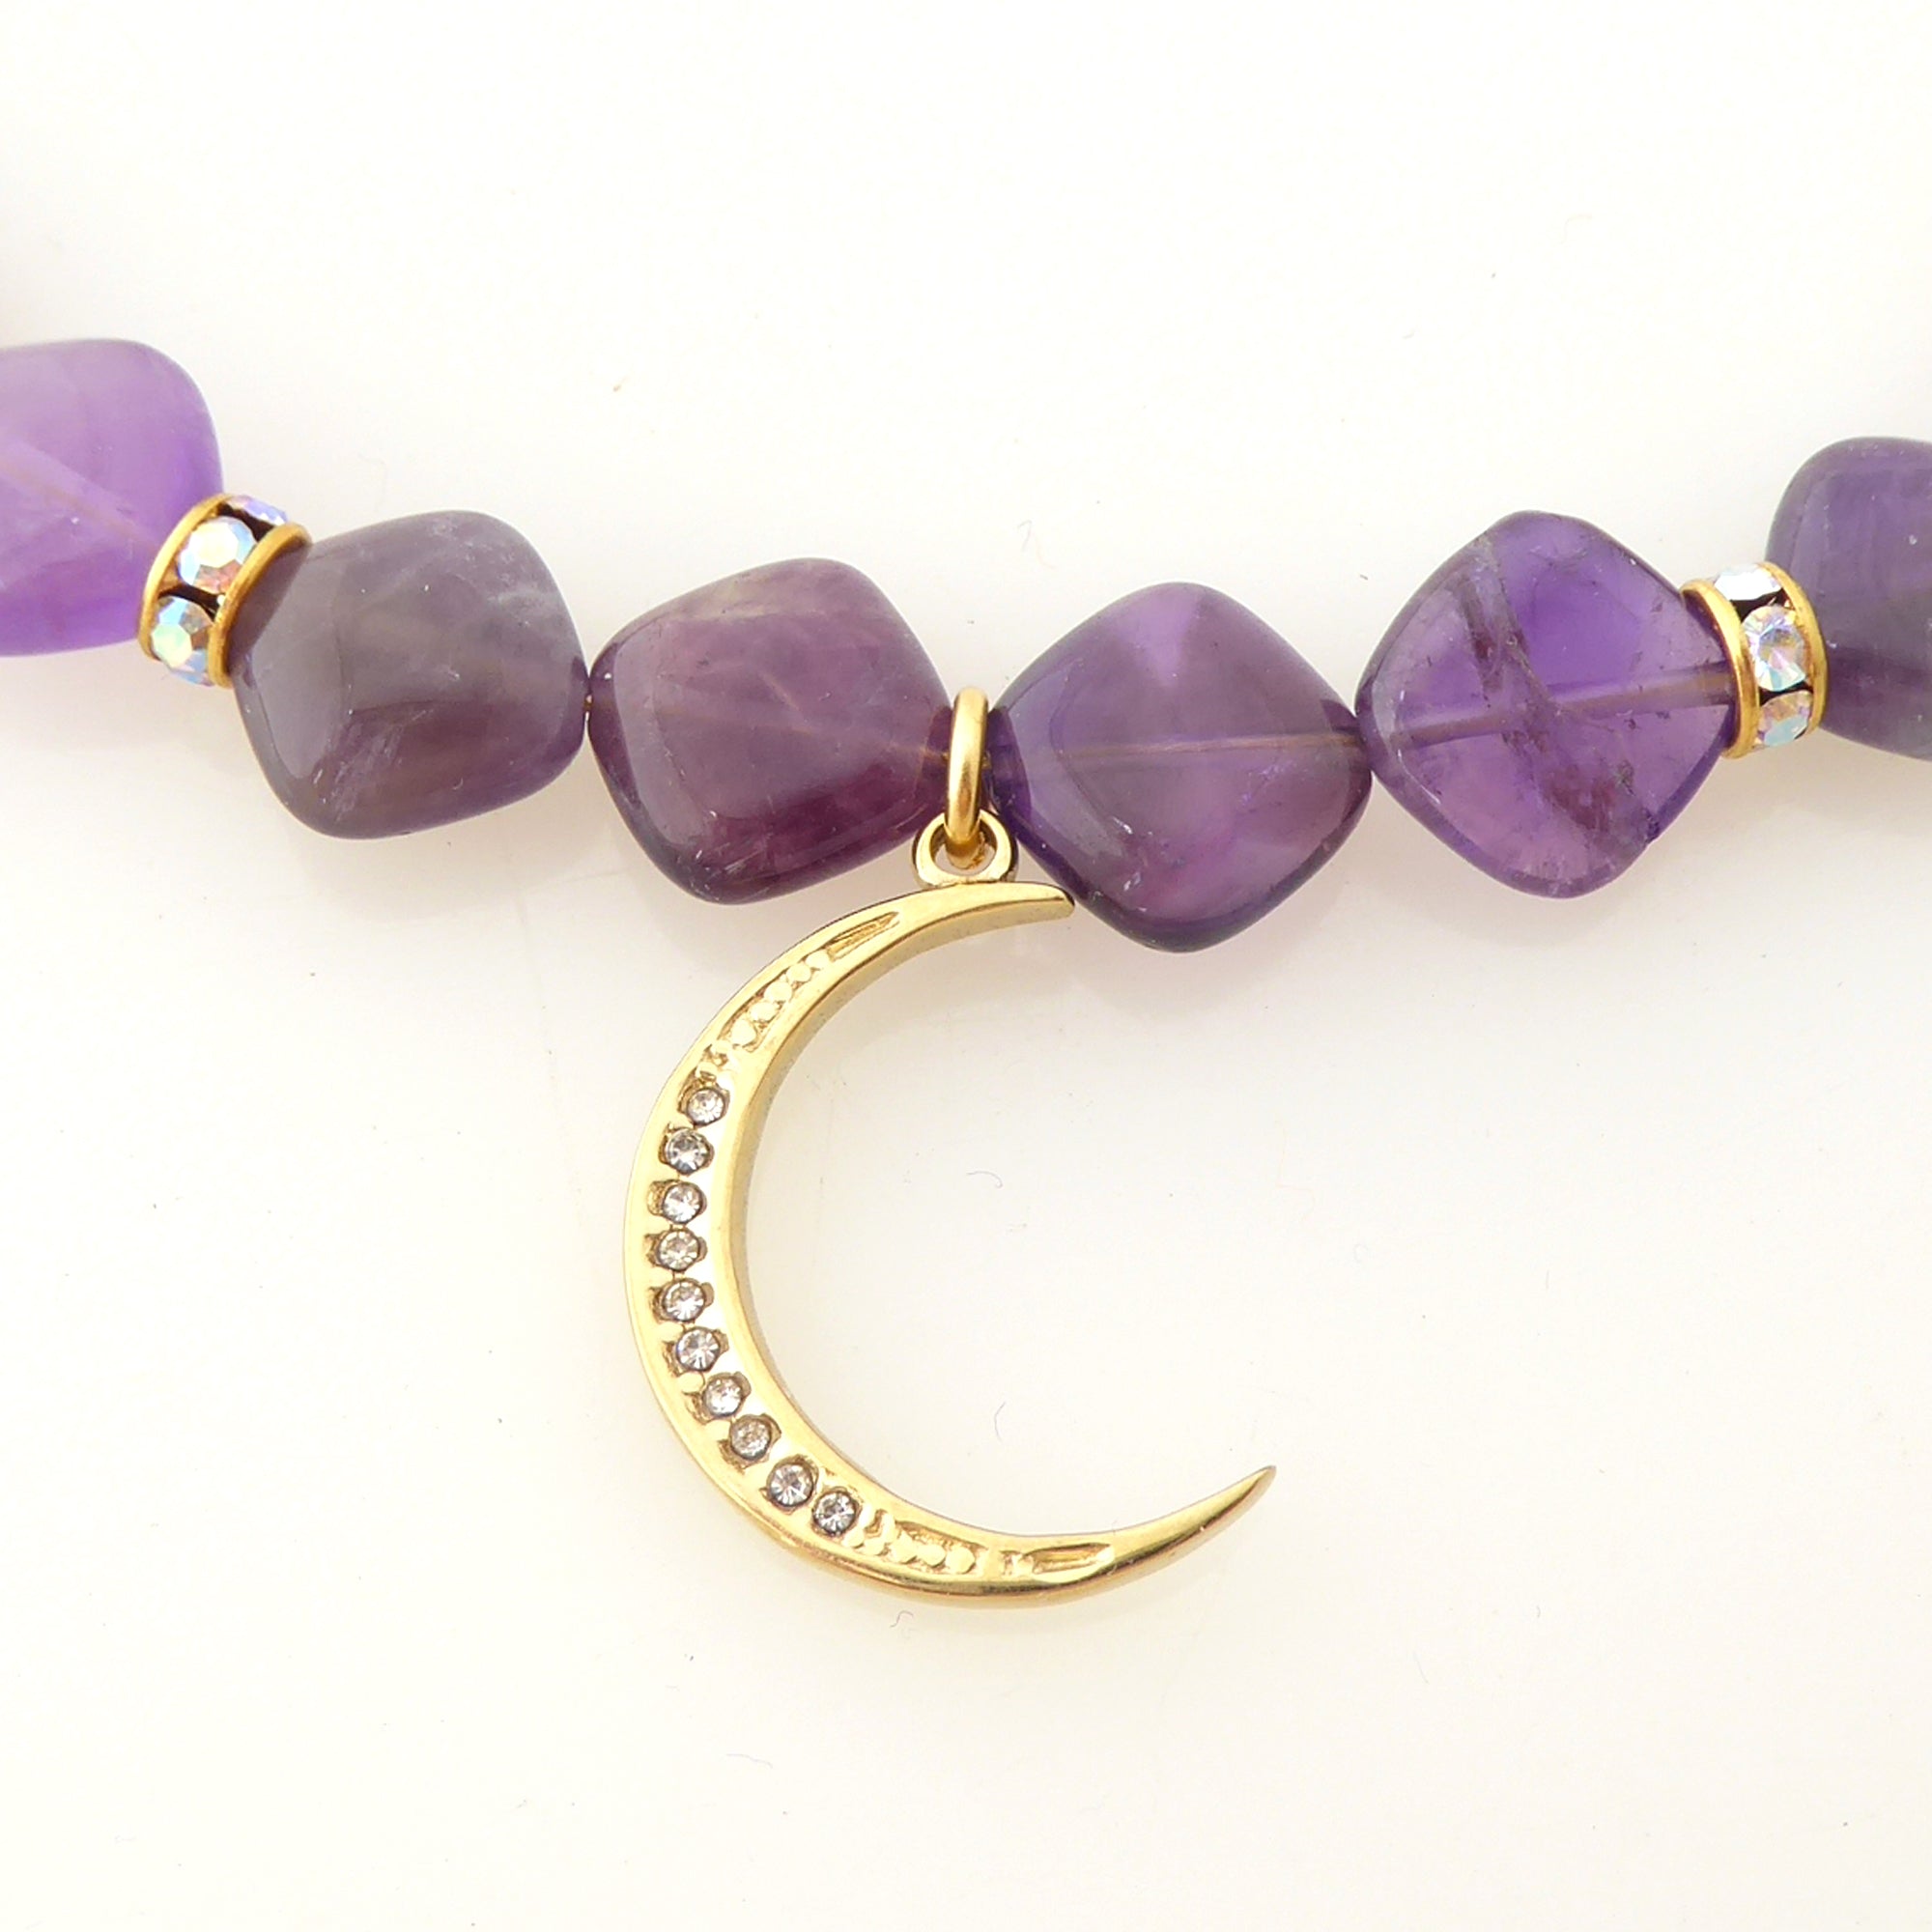 Amethyst and gold crescent moon necklace by Jenny Dayco 4